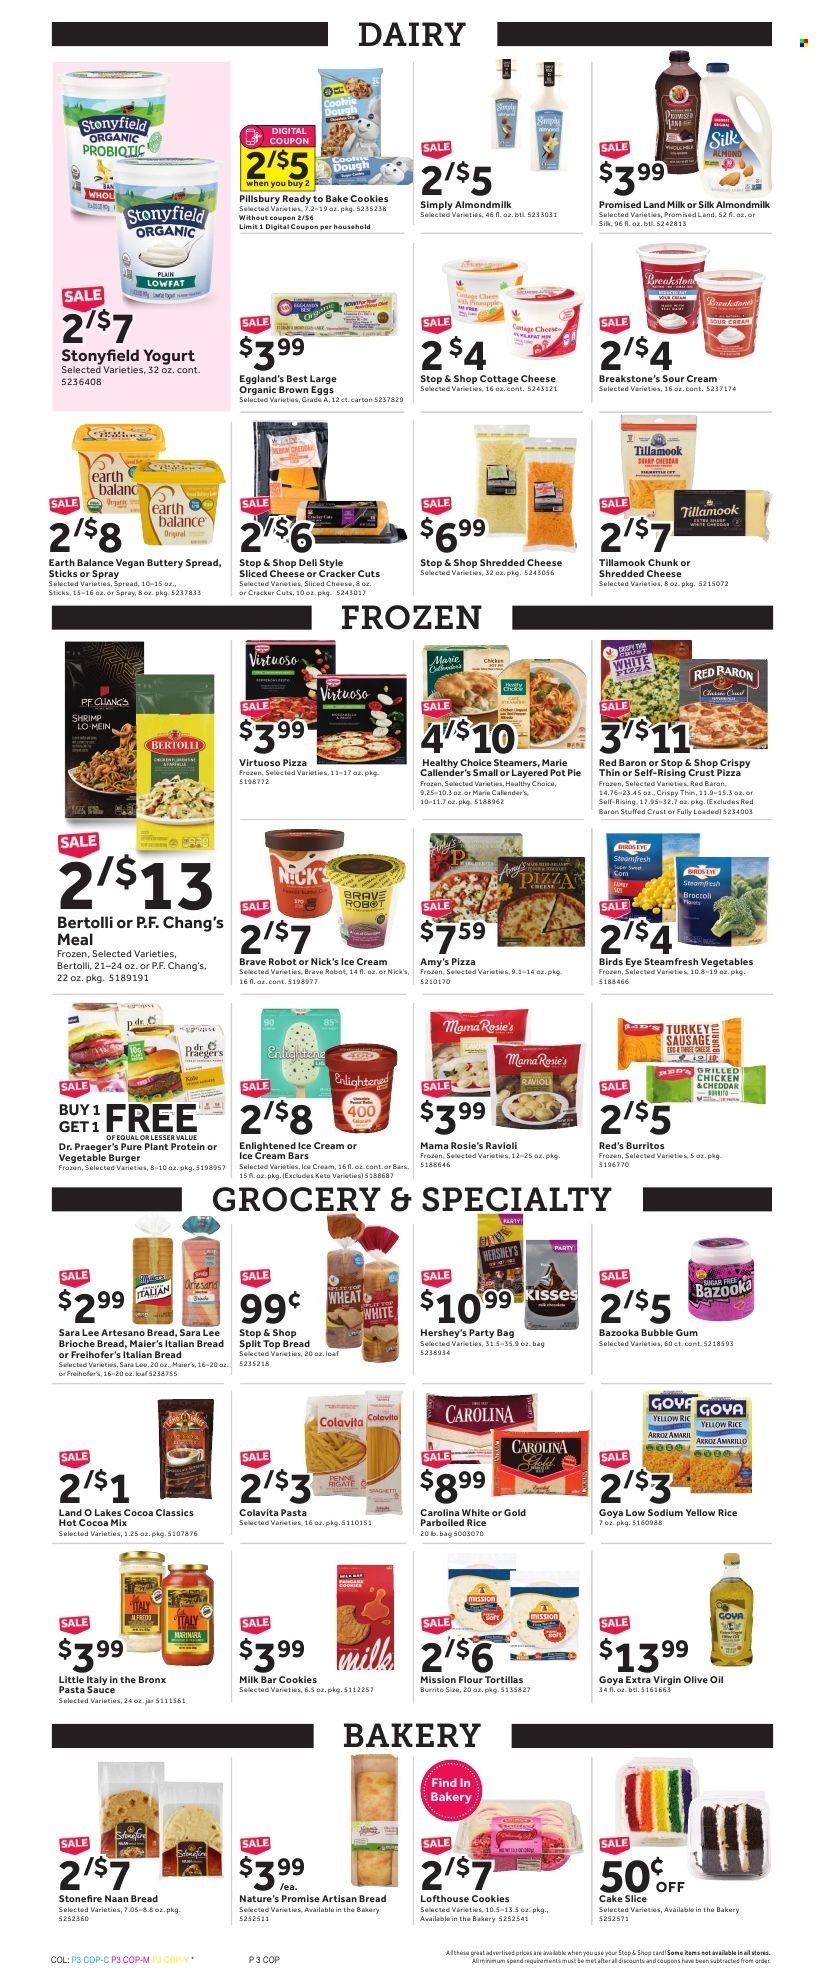 thumbnail - Stop & Shop Flyer - 01/14/2022 - 01/20/2022 - Sales products - tortillas, cake, pie, brioche, Nature’s Promise, Sara Lee, flour tortillas, pot pie, hamburger, shrimps, ravioli, pasta sauce, sauce, Pillsbury, Bird's Eye, burrito, Healthy Choice, Marie Callender's, Bertolli, sausage, cottage cheese, shredded cheese, sliced cheese, cheddar, yoghurt, almond milk, milk, Silk, eggs, buttery spread, sour cream, ice cream, ice cream bars, Hershey's, Nick's Ice Cream, Enlightened lce Cream, Red Baron, cookies, bubblegum, crackers, plant protein, Goya, parboiled rice, extra virgin olive oil, olive oil, oil, hot cocoa, pot. Page 3.